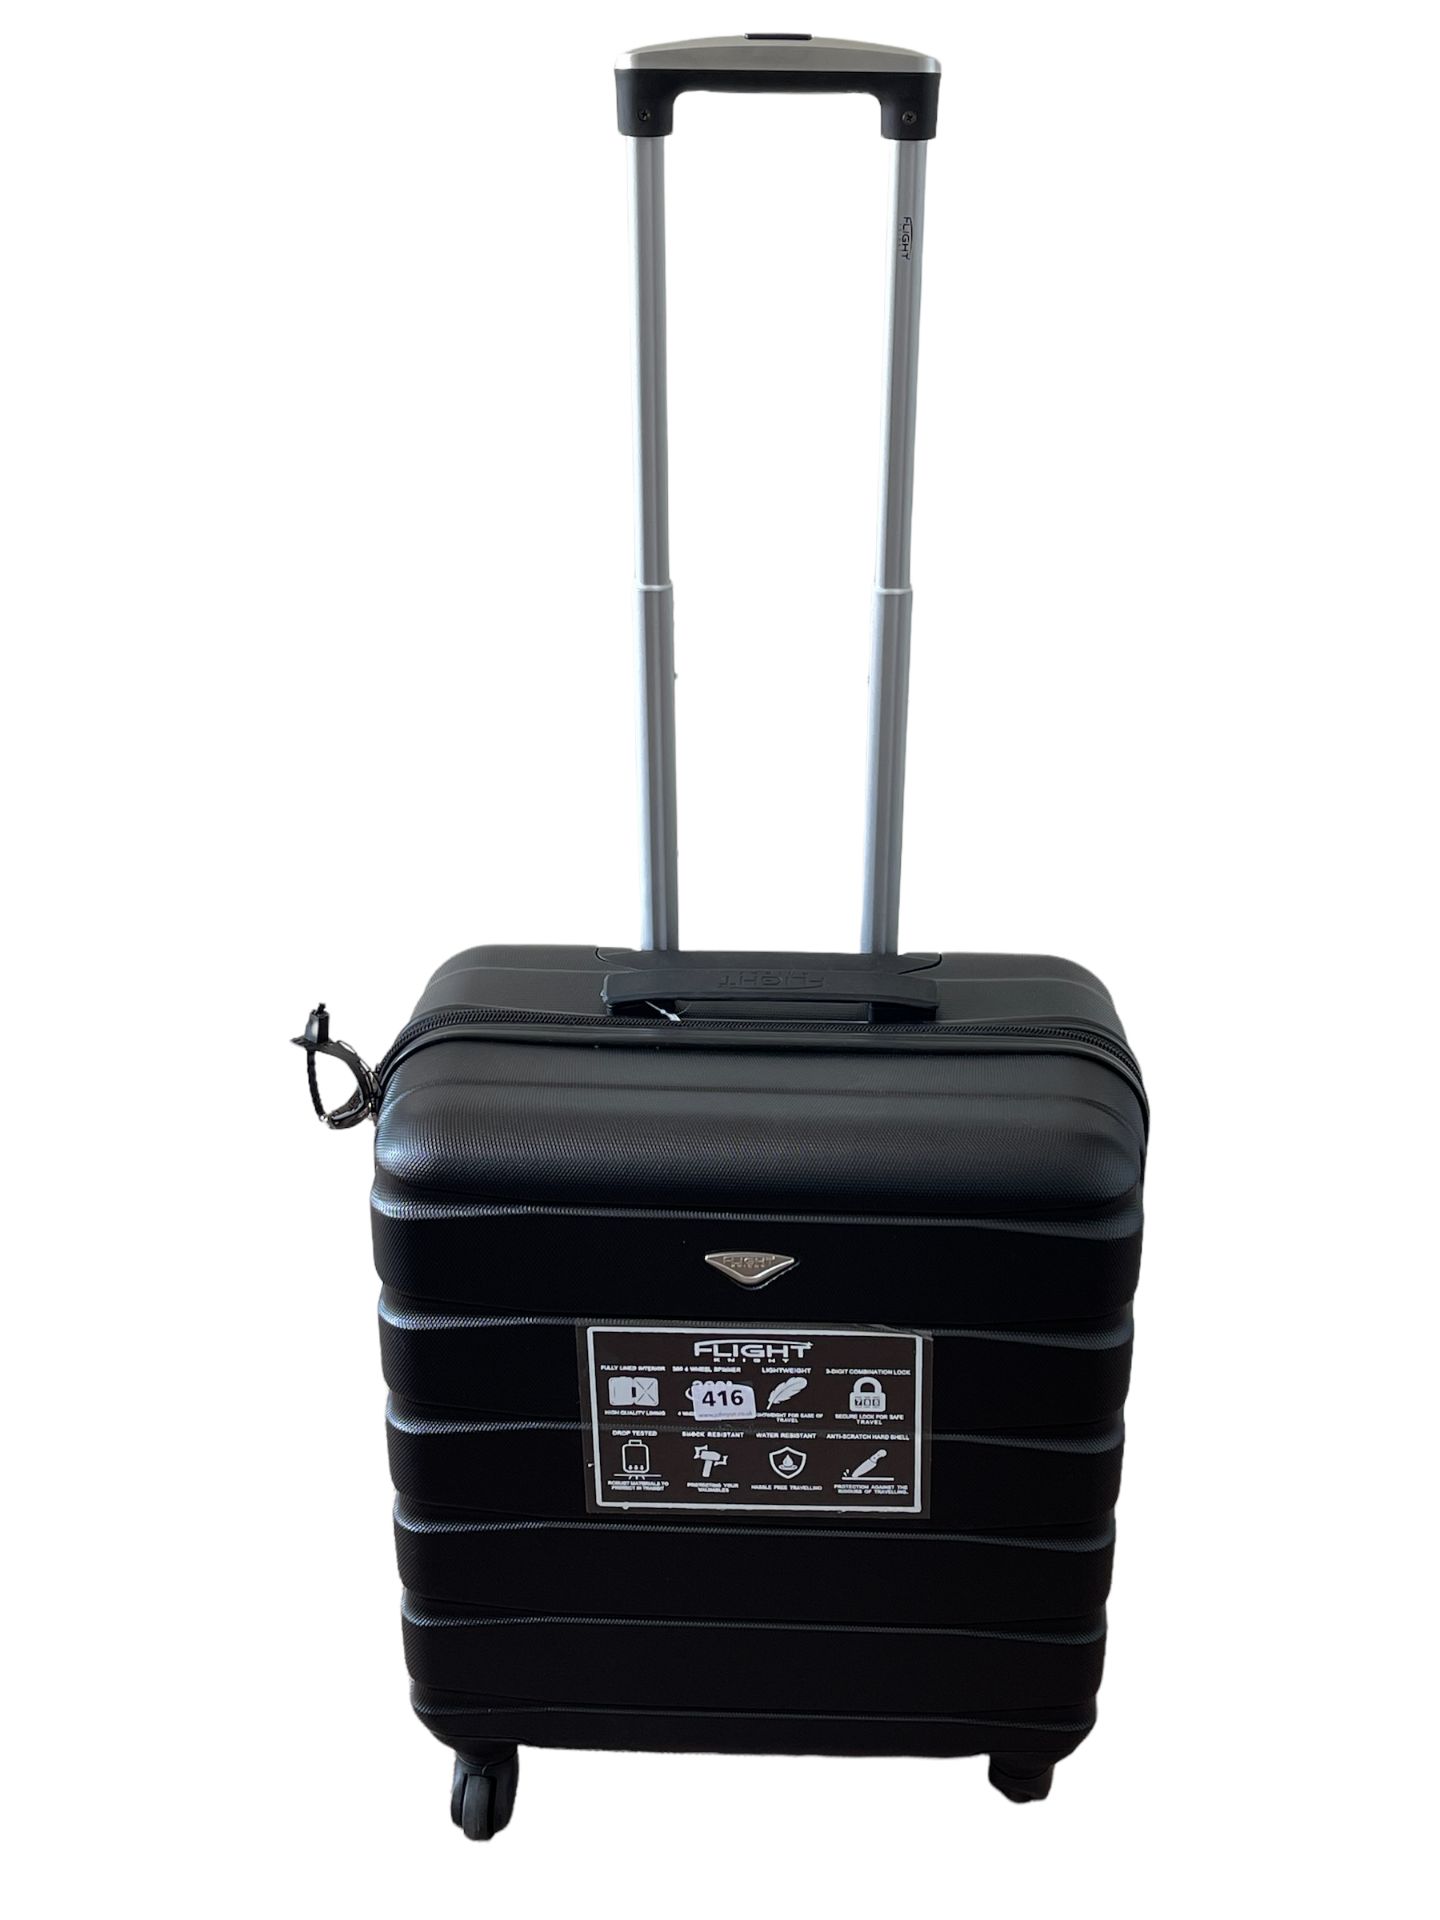 Lost property from our Private Jet Charter - Brand New Case